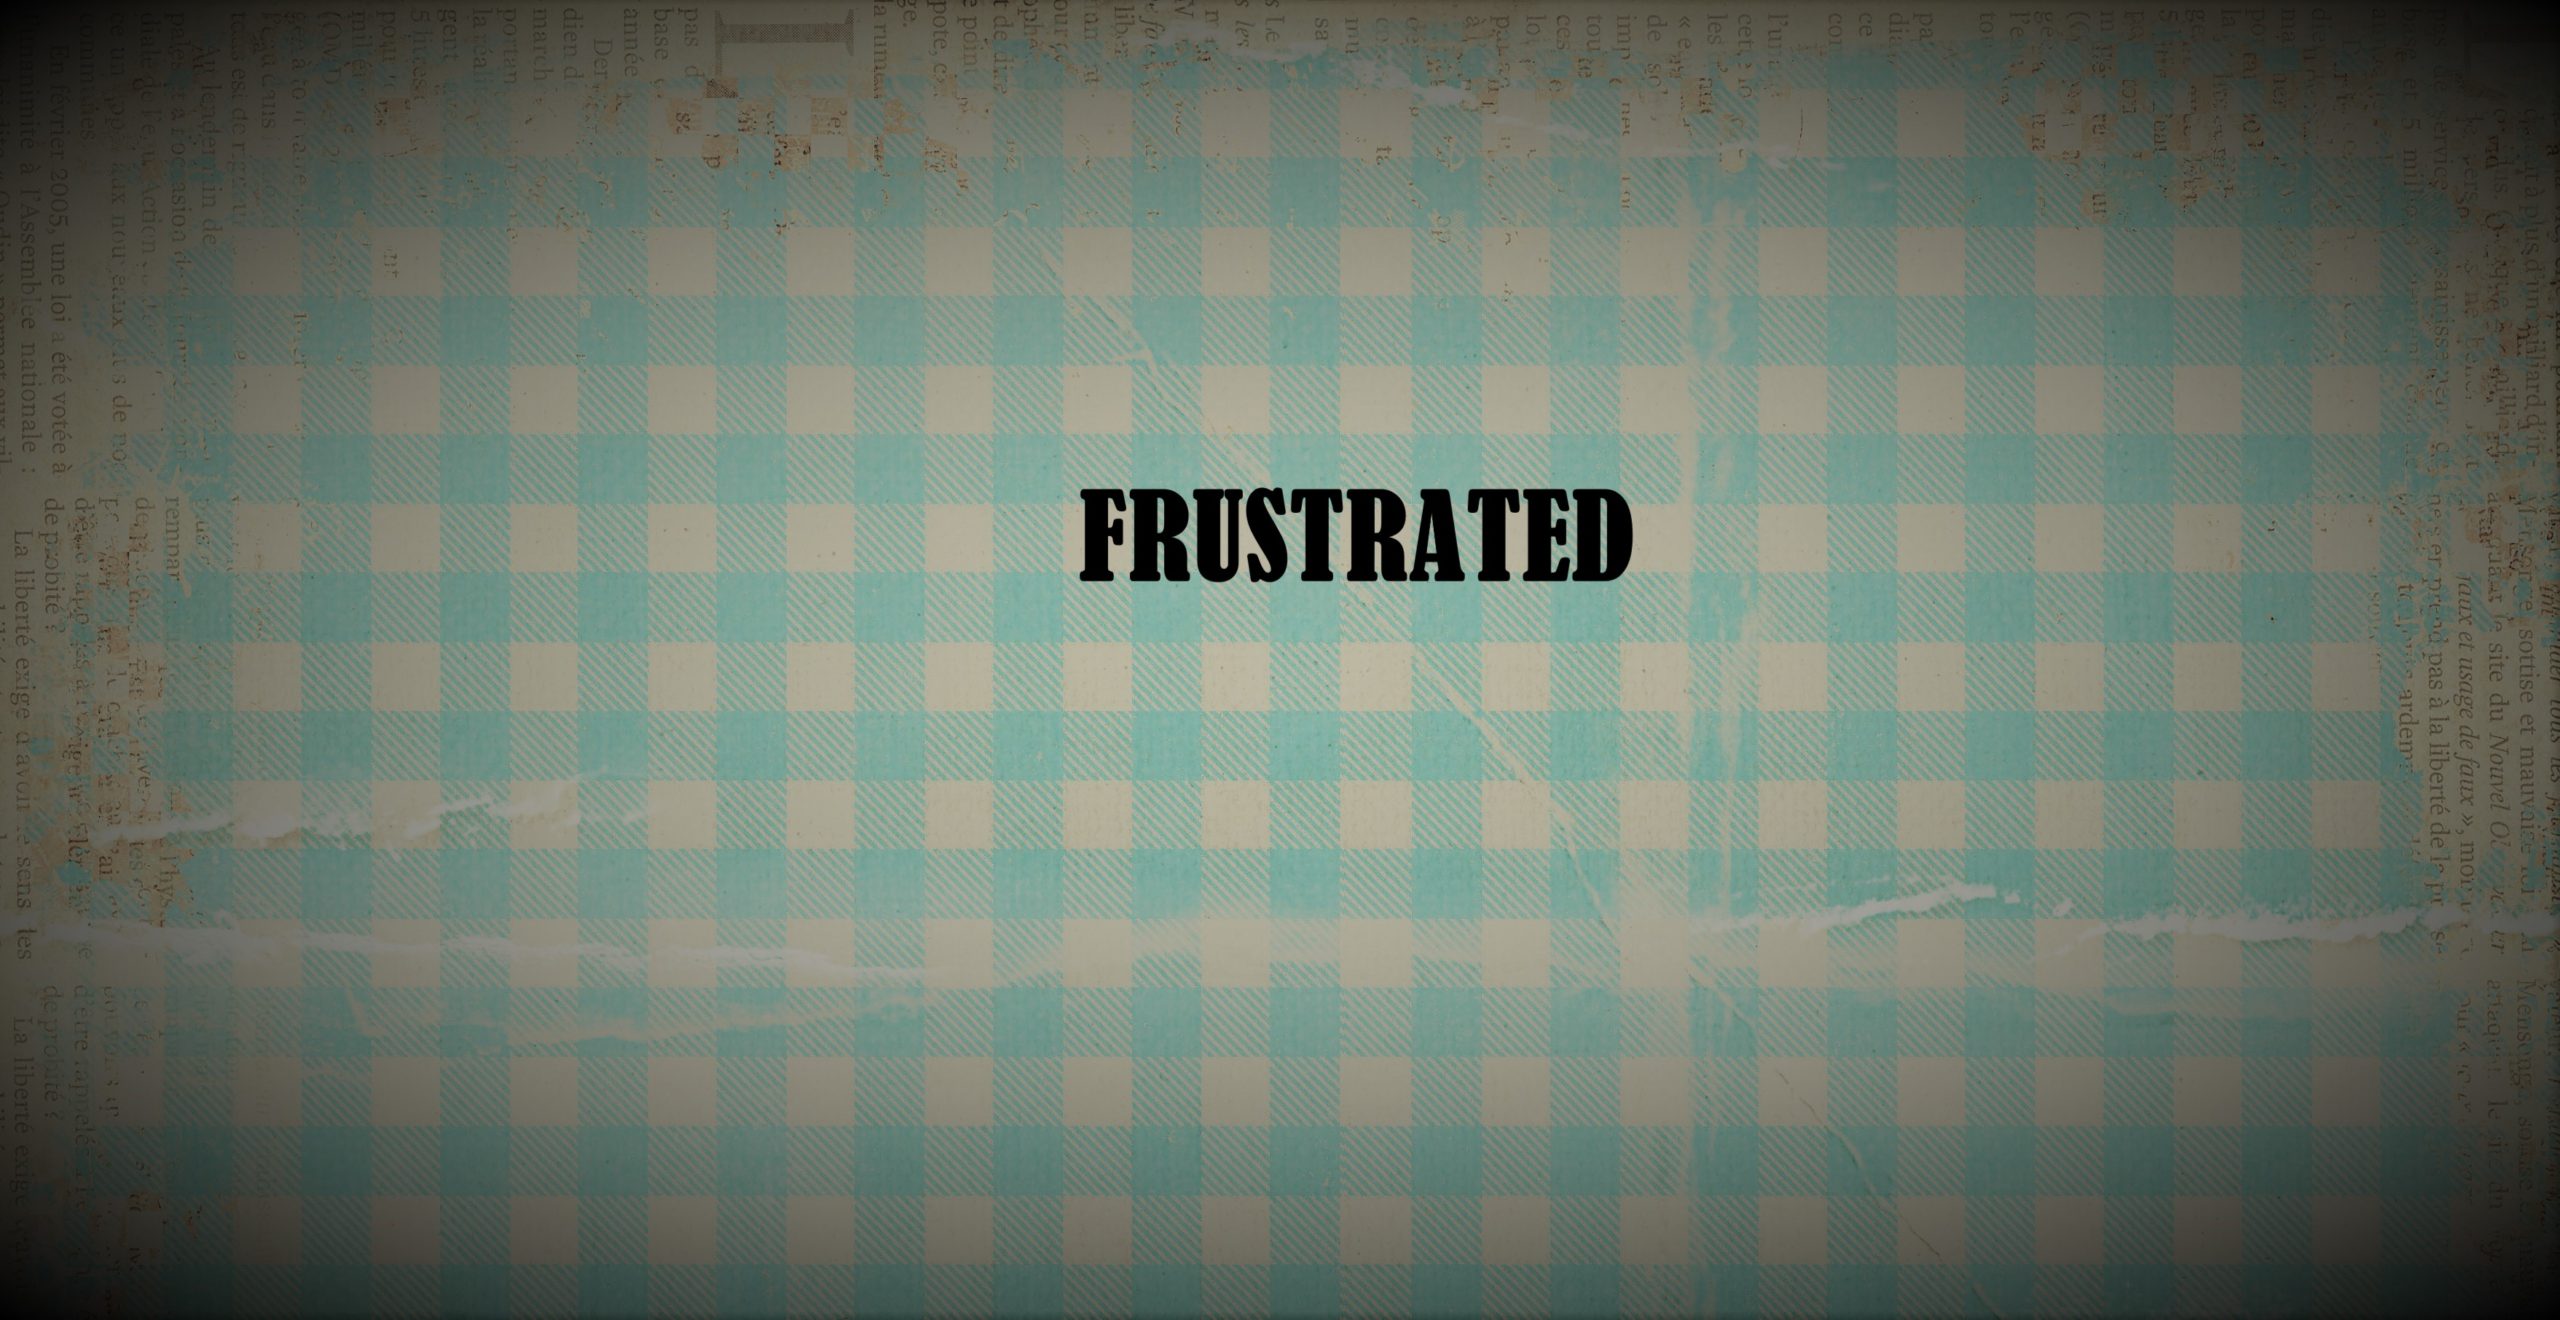 Frustrated-a poem by Cynthia